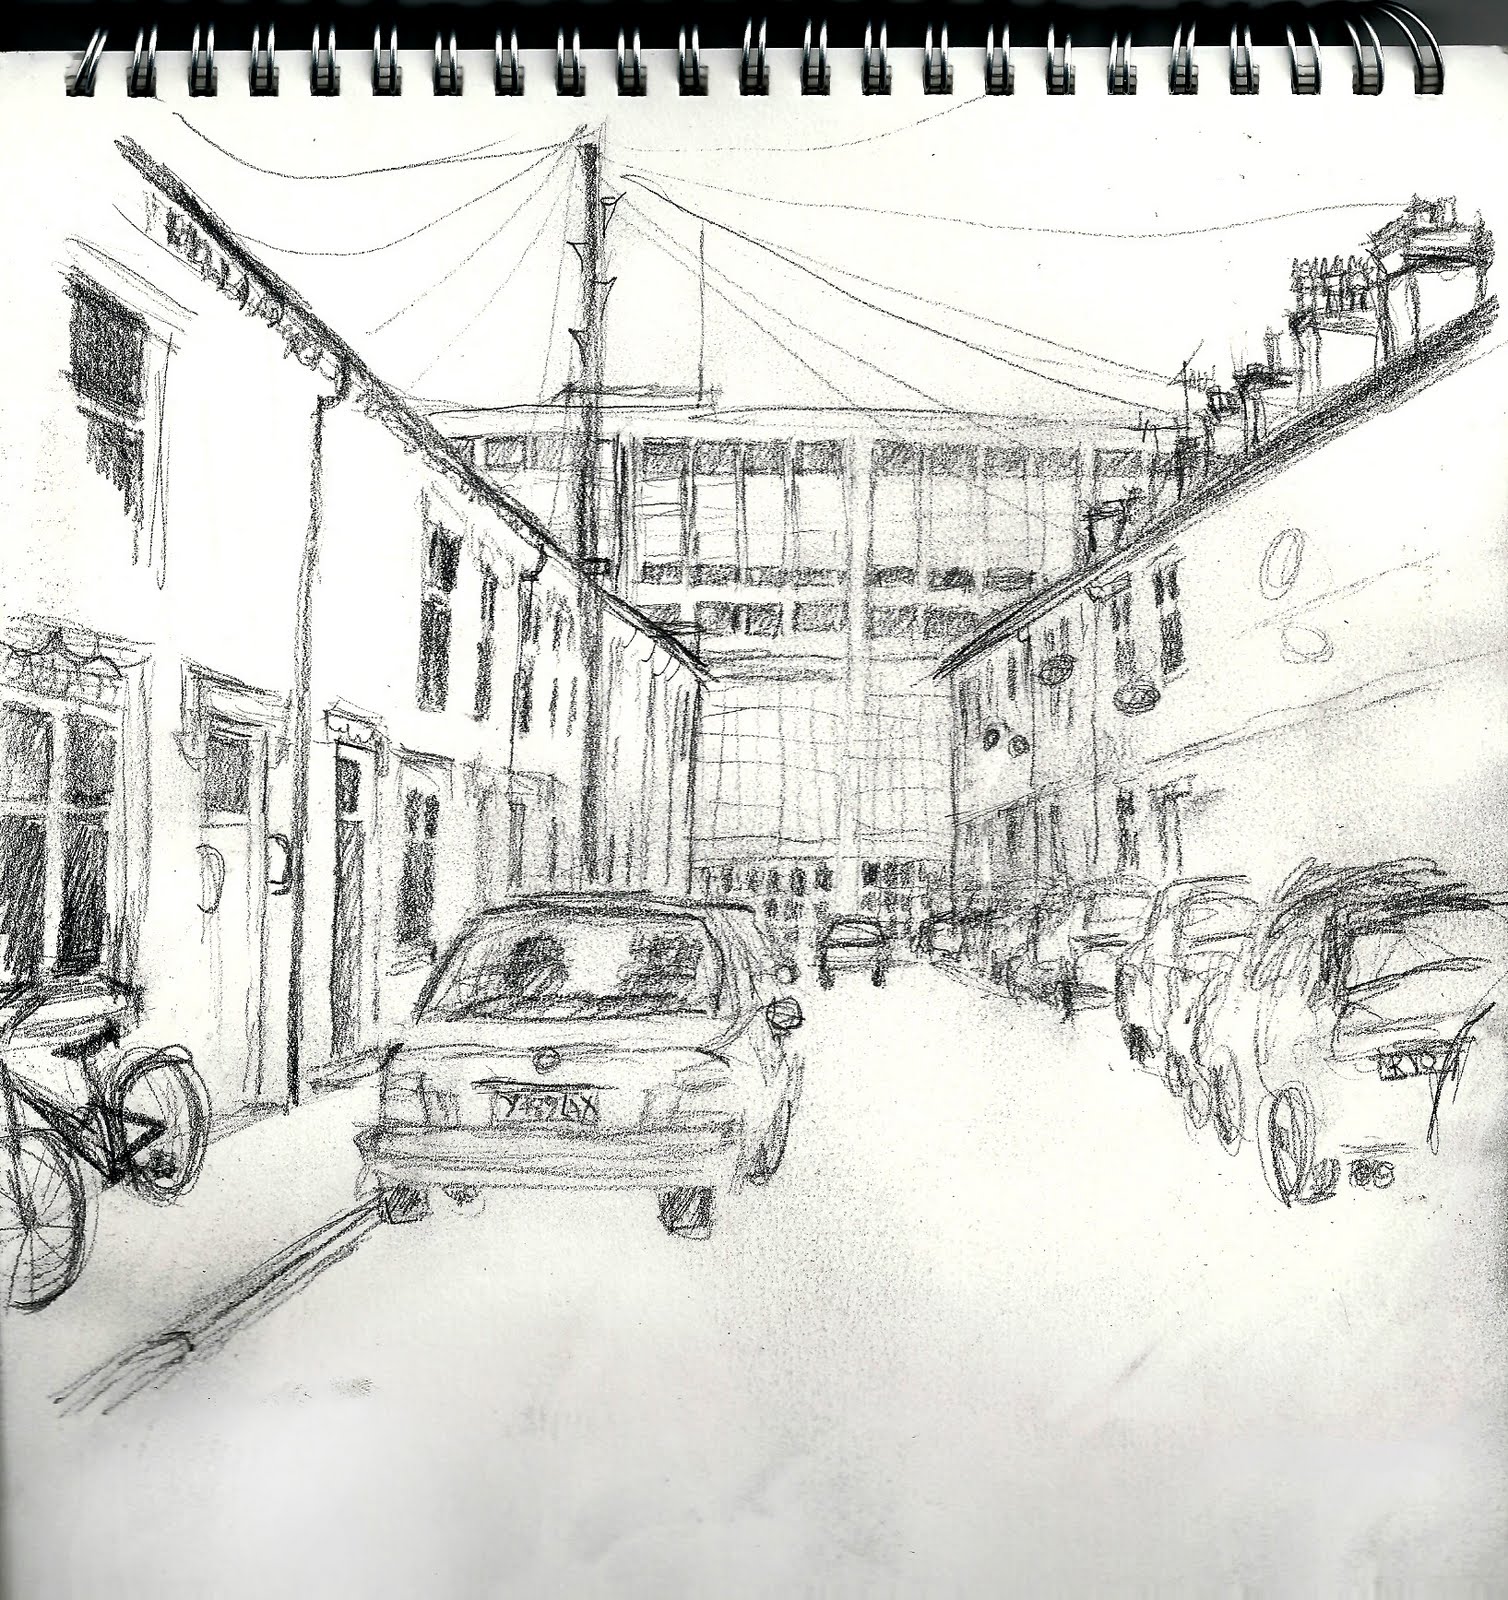 urban sketches done whilst waiting